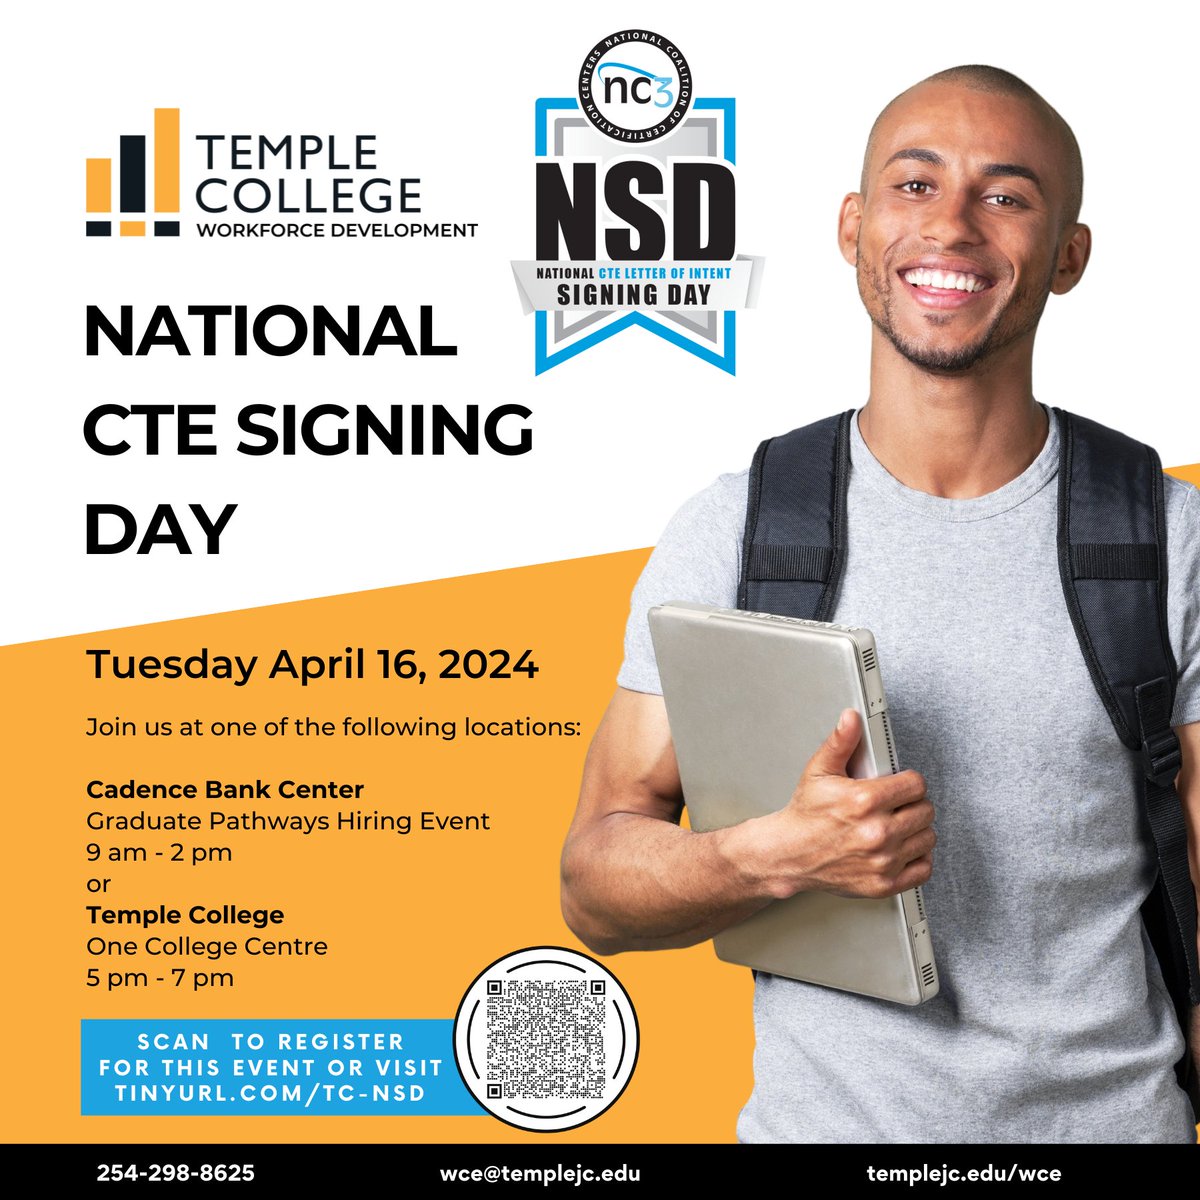 TODAY'S THE DAY! National CTE Signing Day. Visit the Graduate Pathways Hiring Event at the Cadence Bank Center until 2 p.m. or Temple College's One College Center from 5-7 p.m. Learn more: bit.ly/3TnfpLy #yourcommunityscollege